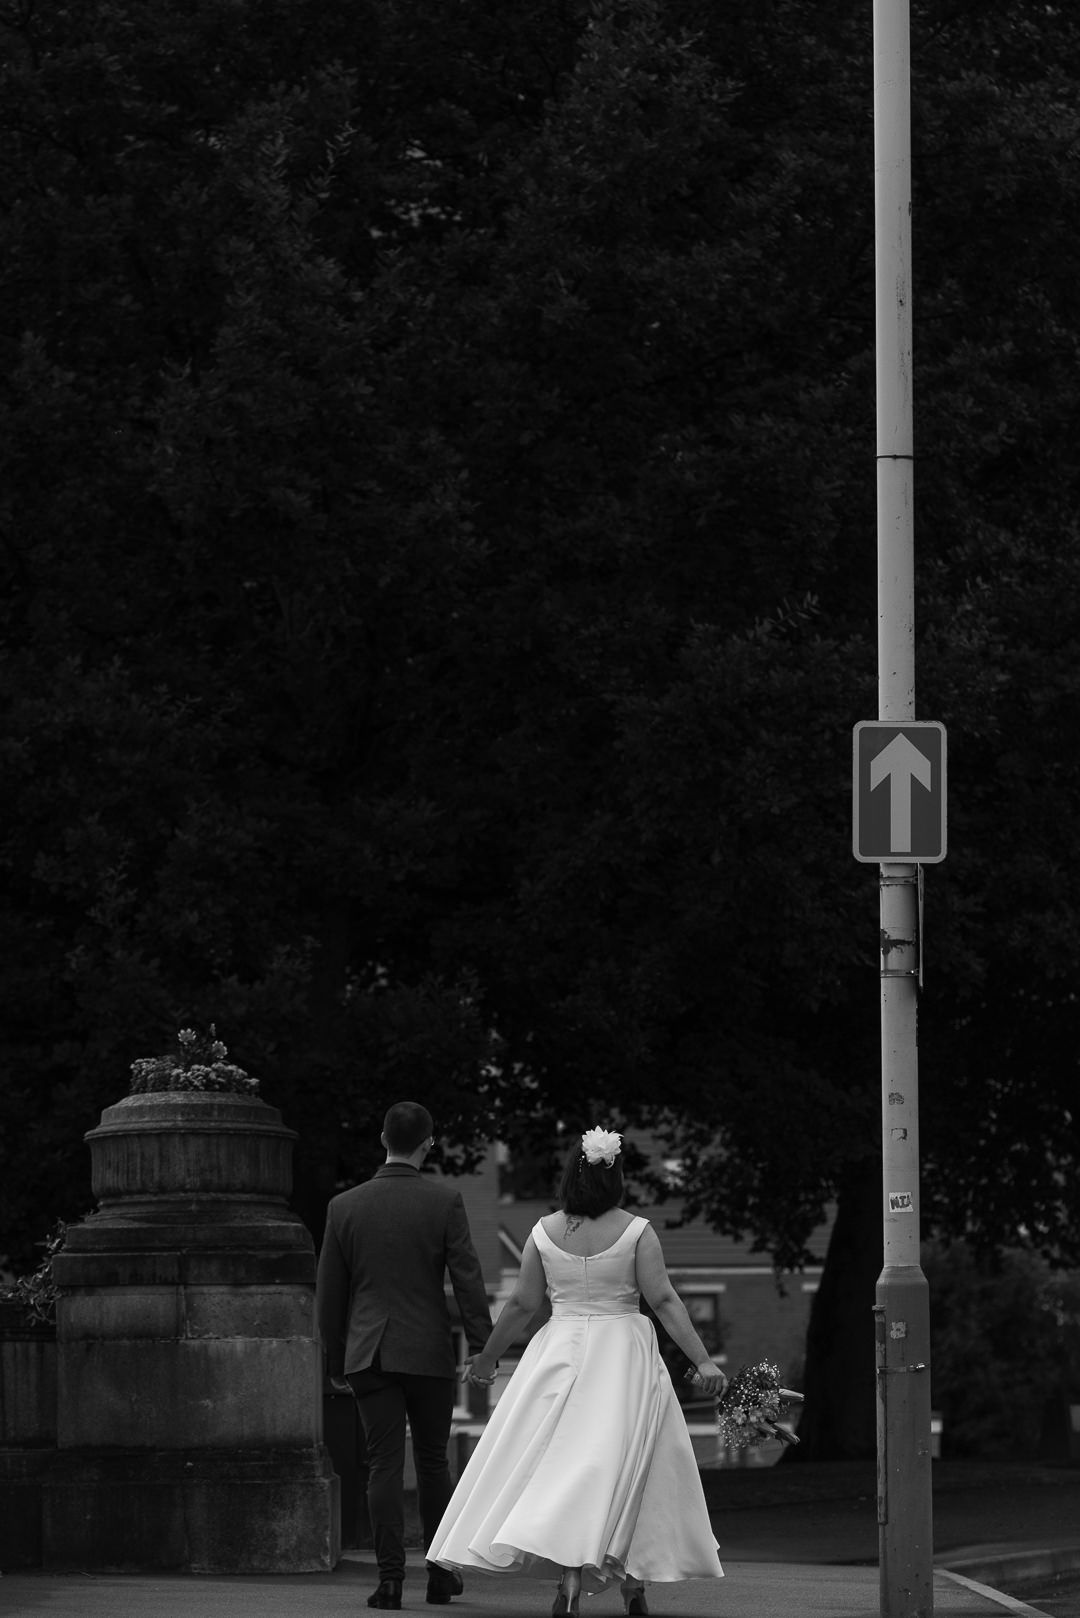 the bride and groom are walking away from the camera down the street with tall trees around them